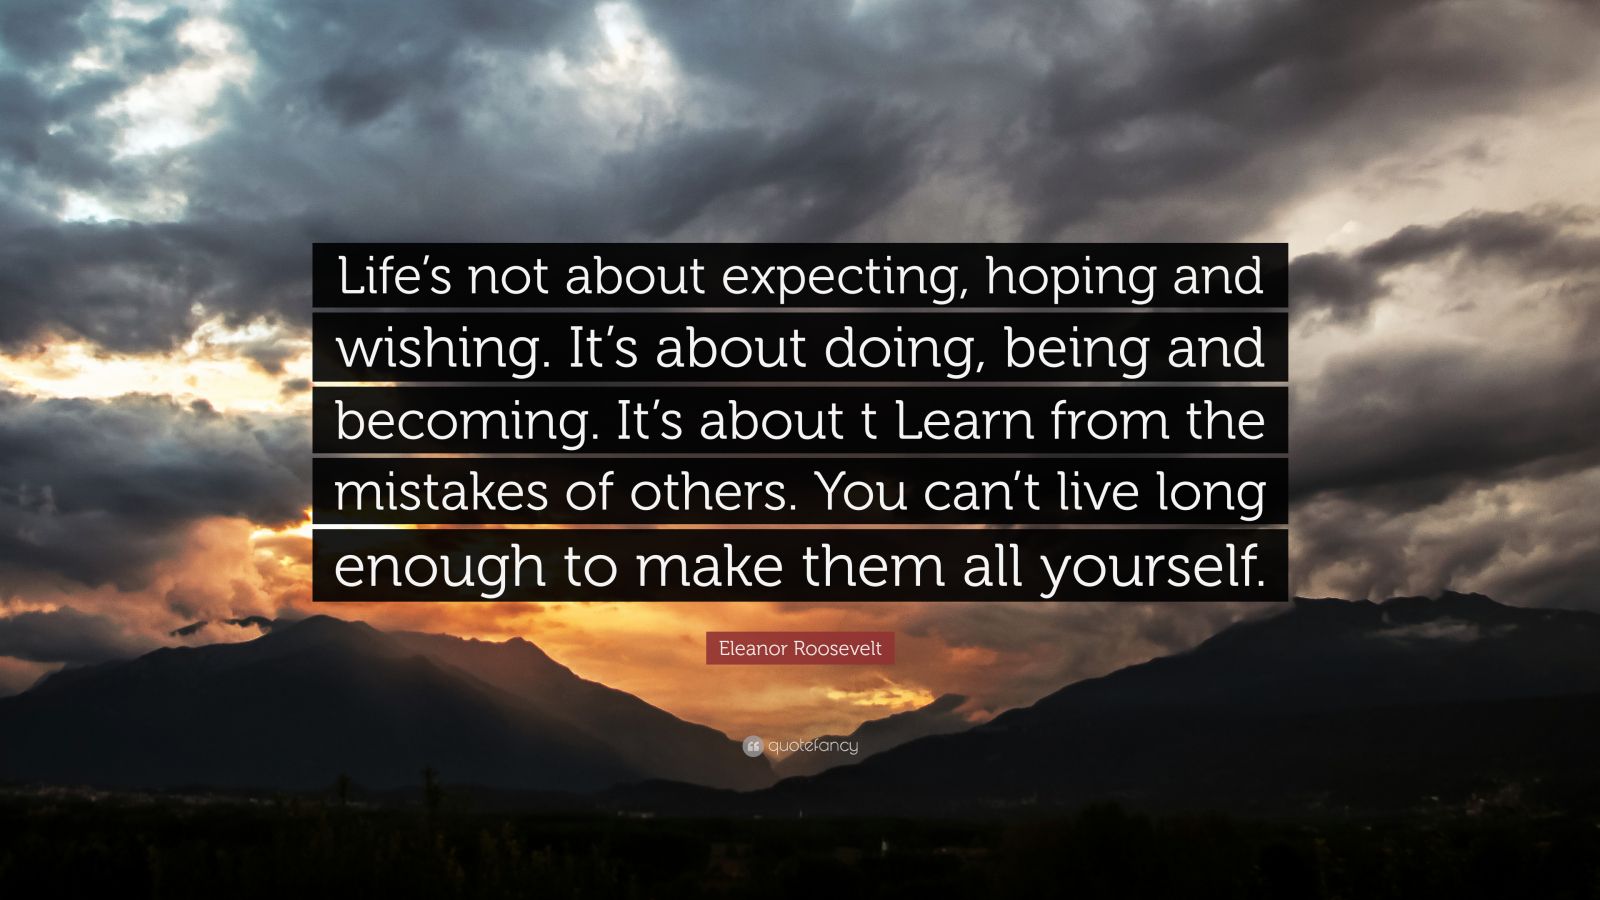 Eleanor Roosevelt Quote: Lifes not about expecting ...